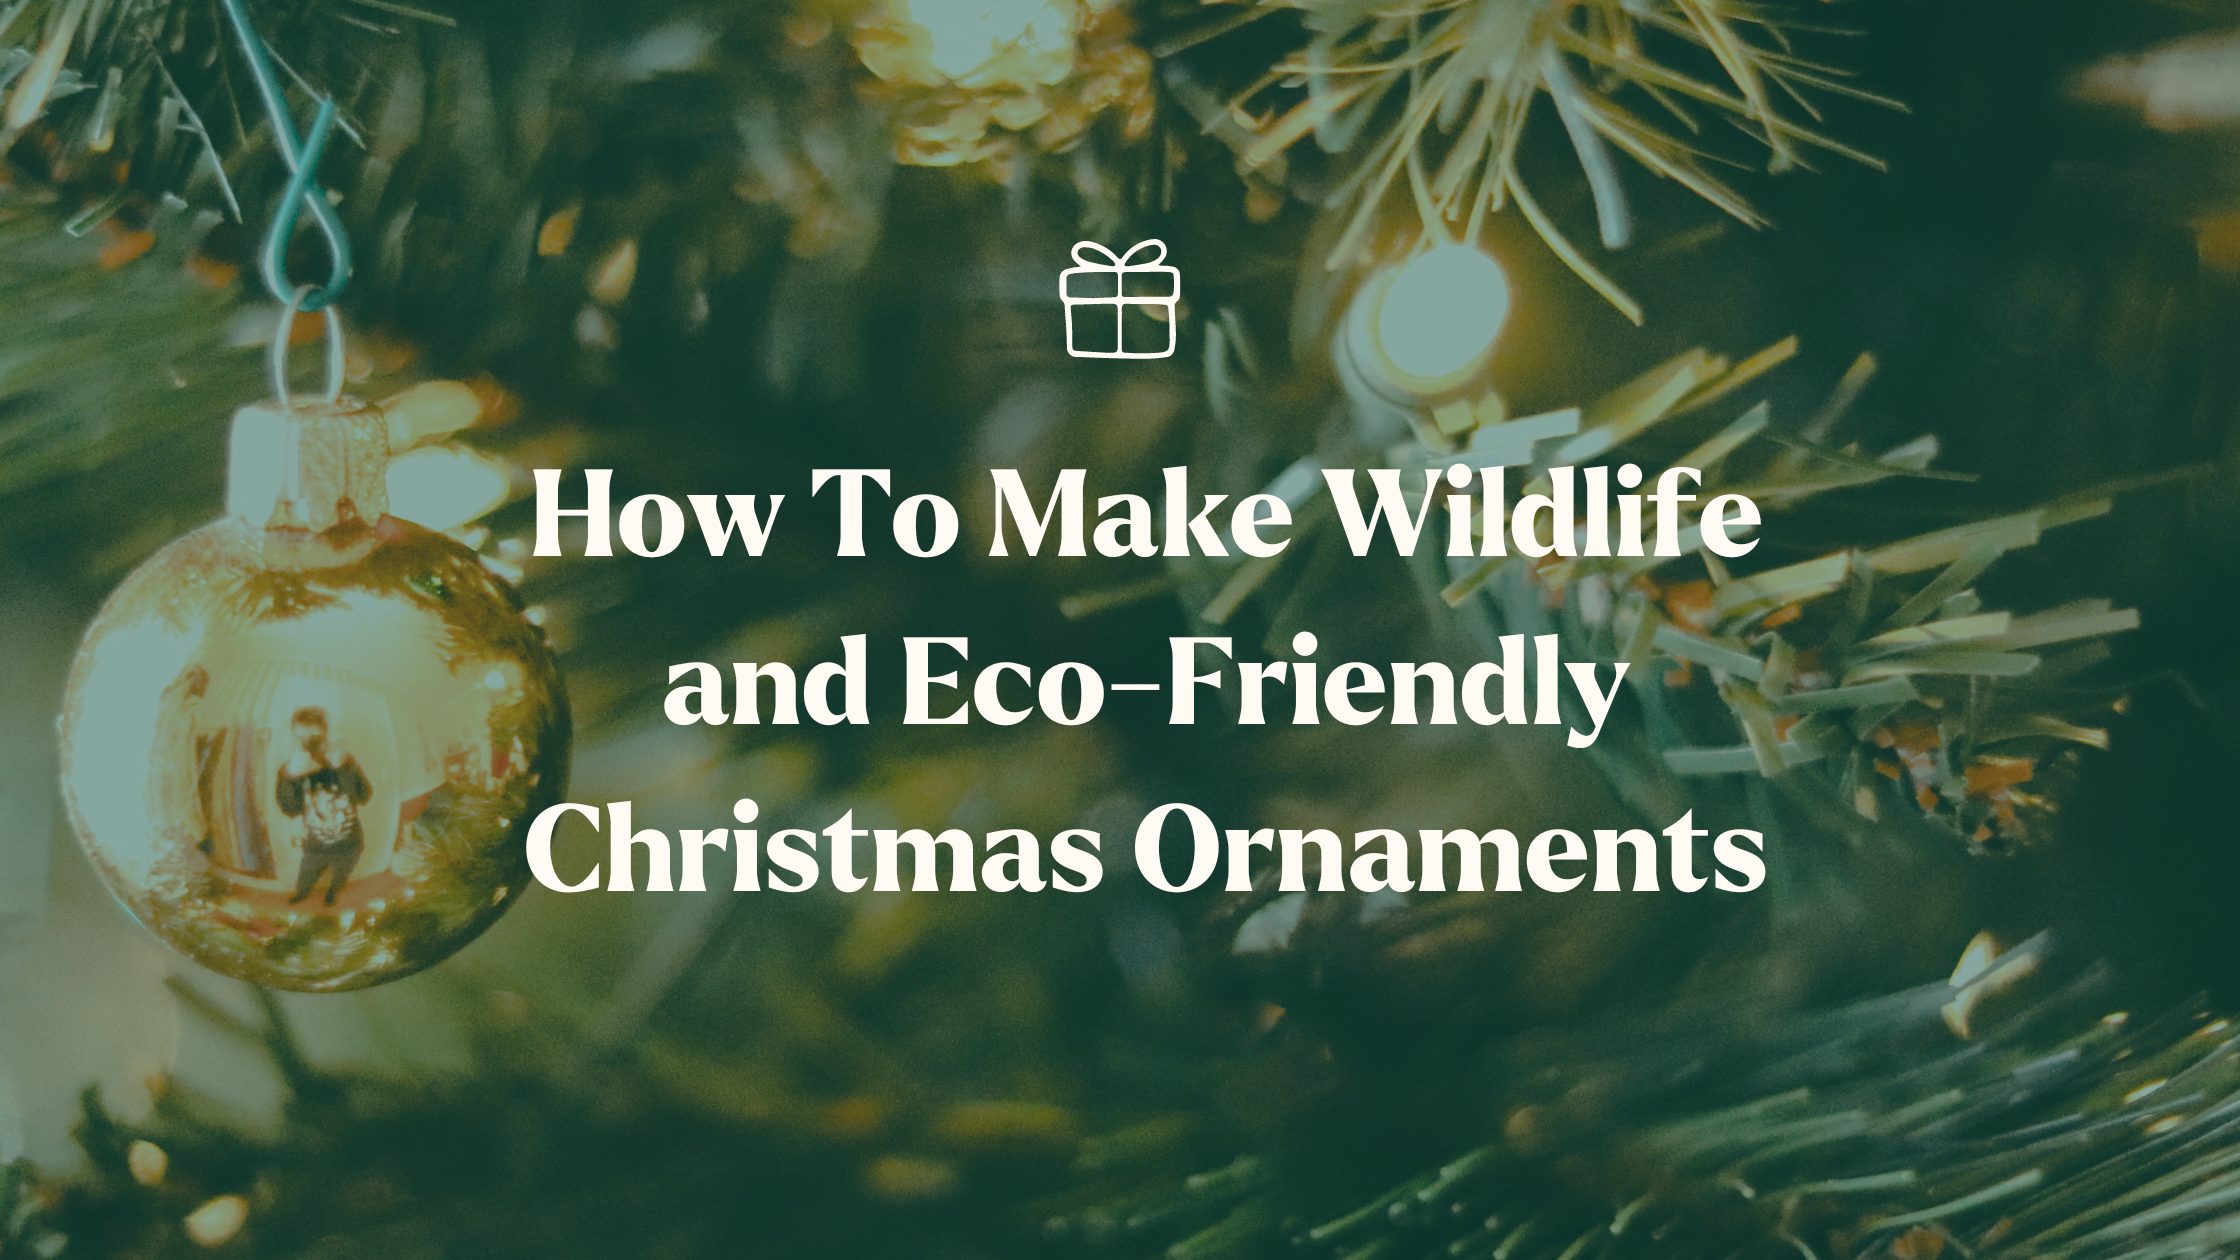 How To Make Wildlife and Eco-Friendly Christmas Ornaments